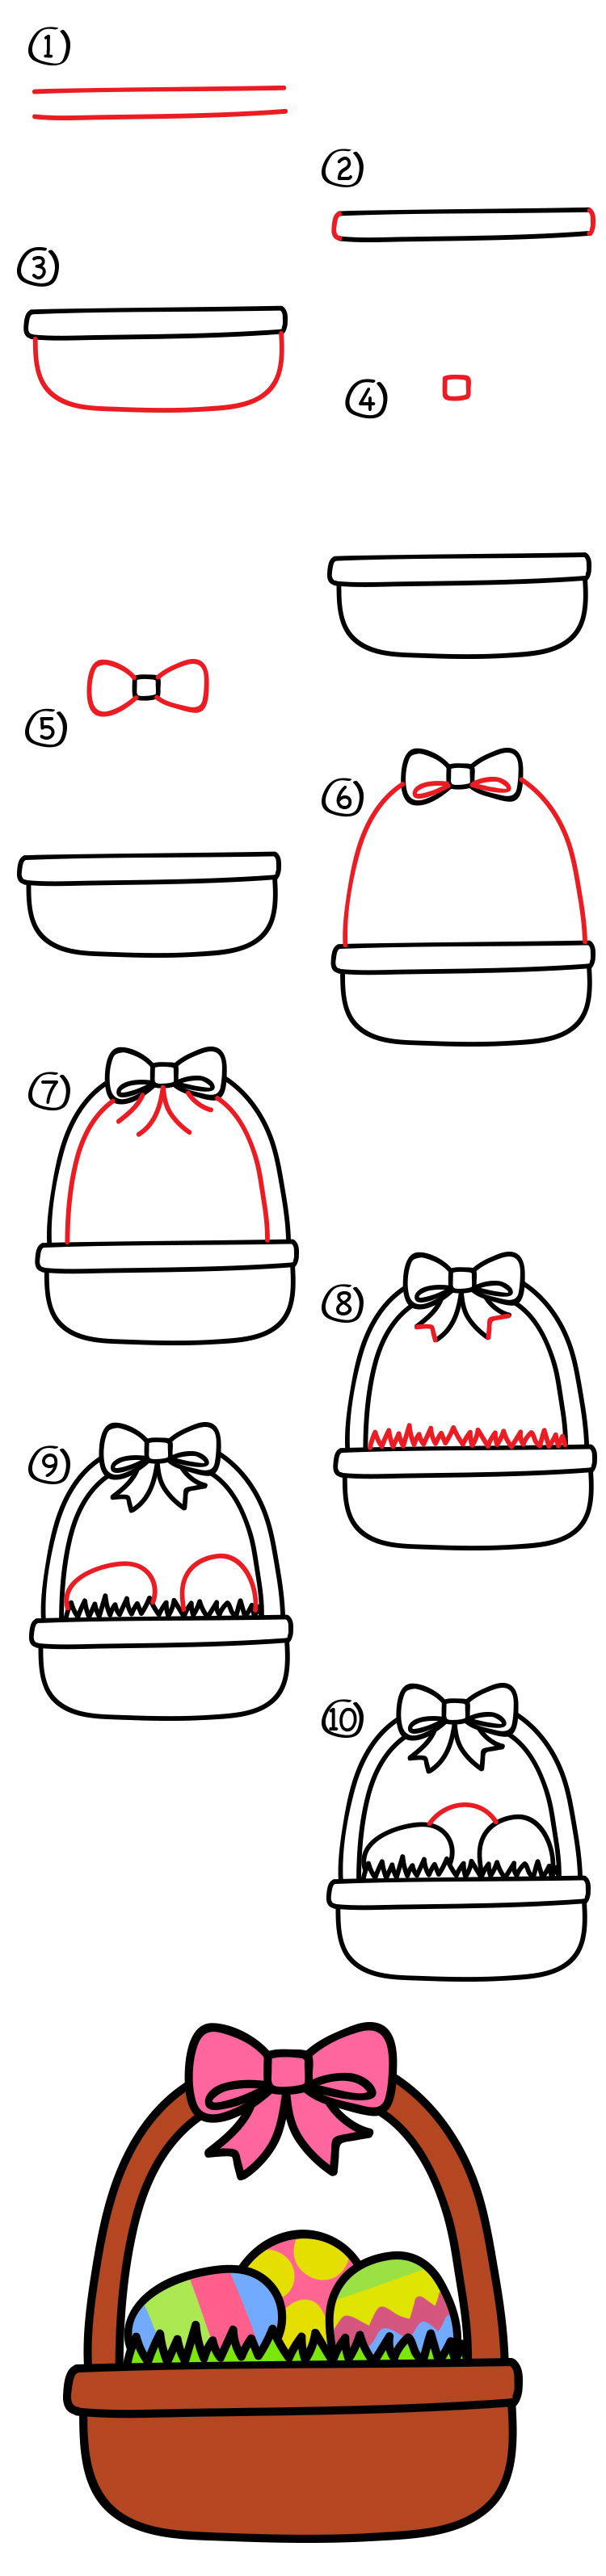 How To Draw An Easter Basket - Art For Kids Hub